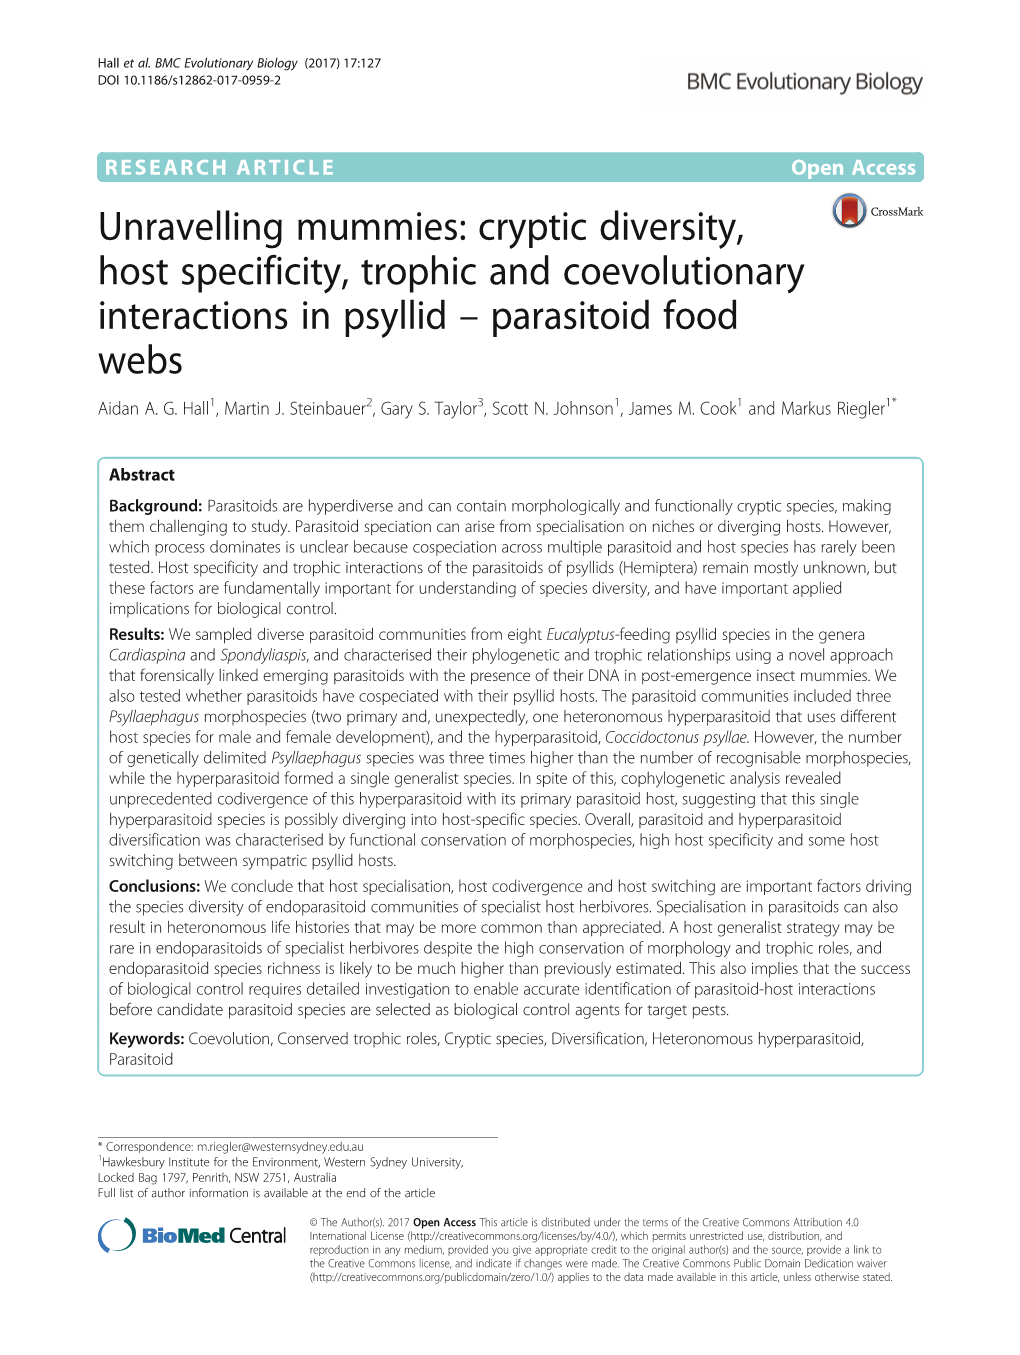 Unravelling Mummies: Cryptic Diversity, Host Specificity, Trophic and Coevolutionary Interactions in Psyllid – Parasitoid Food Webs Aidan A